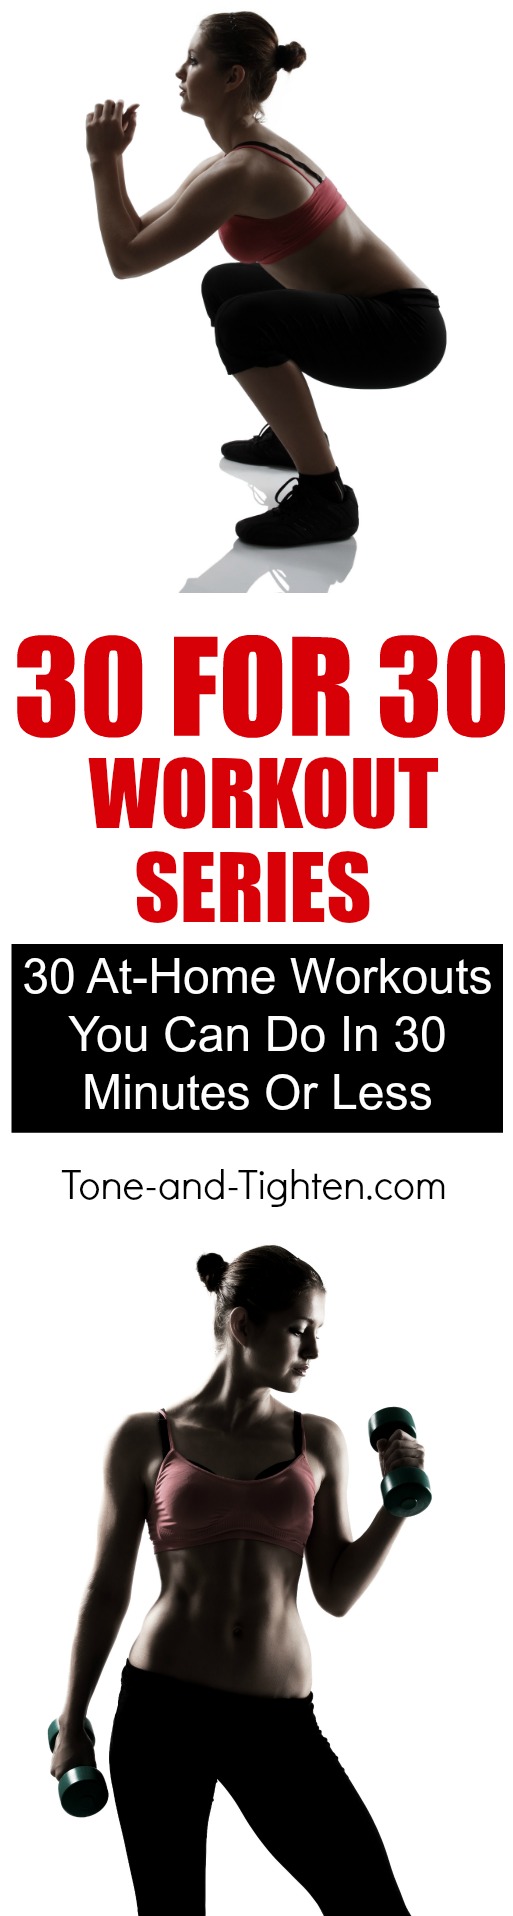 30 awesome home workouts that take 30 minutes or less! | Tone-and-Tighten.com